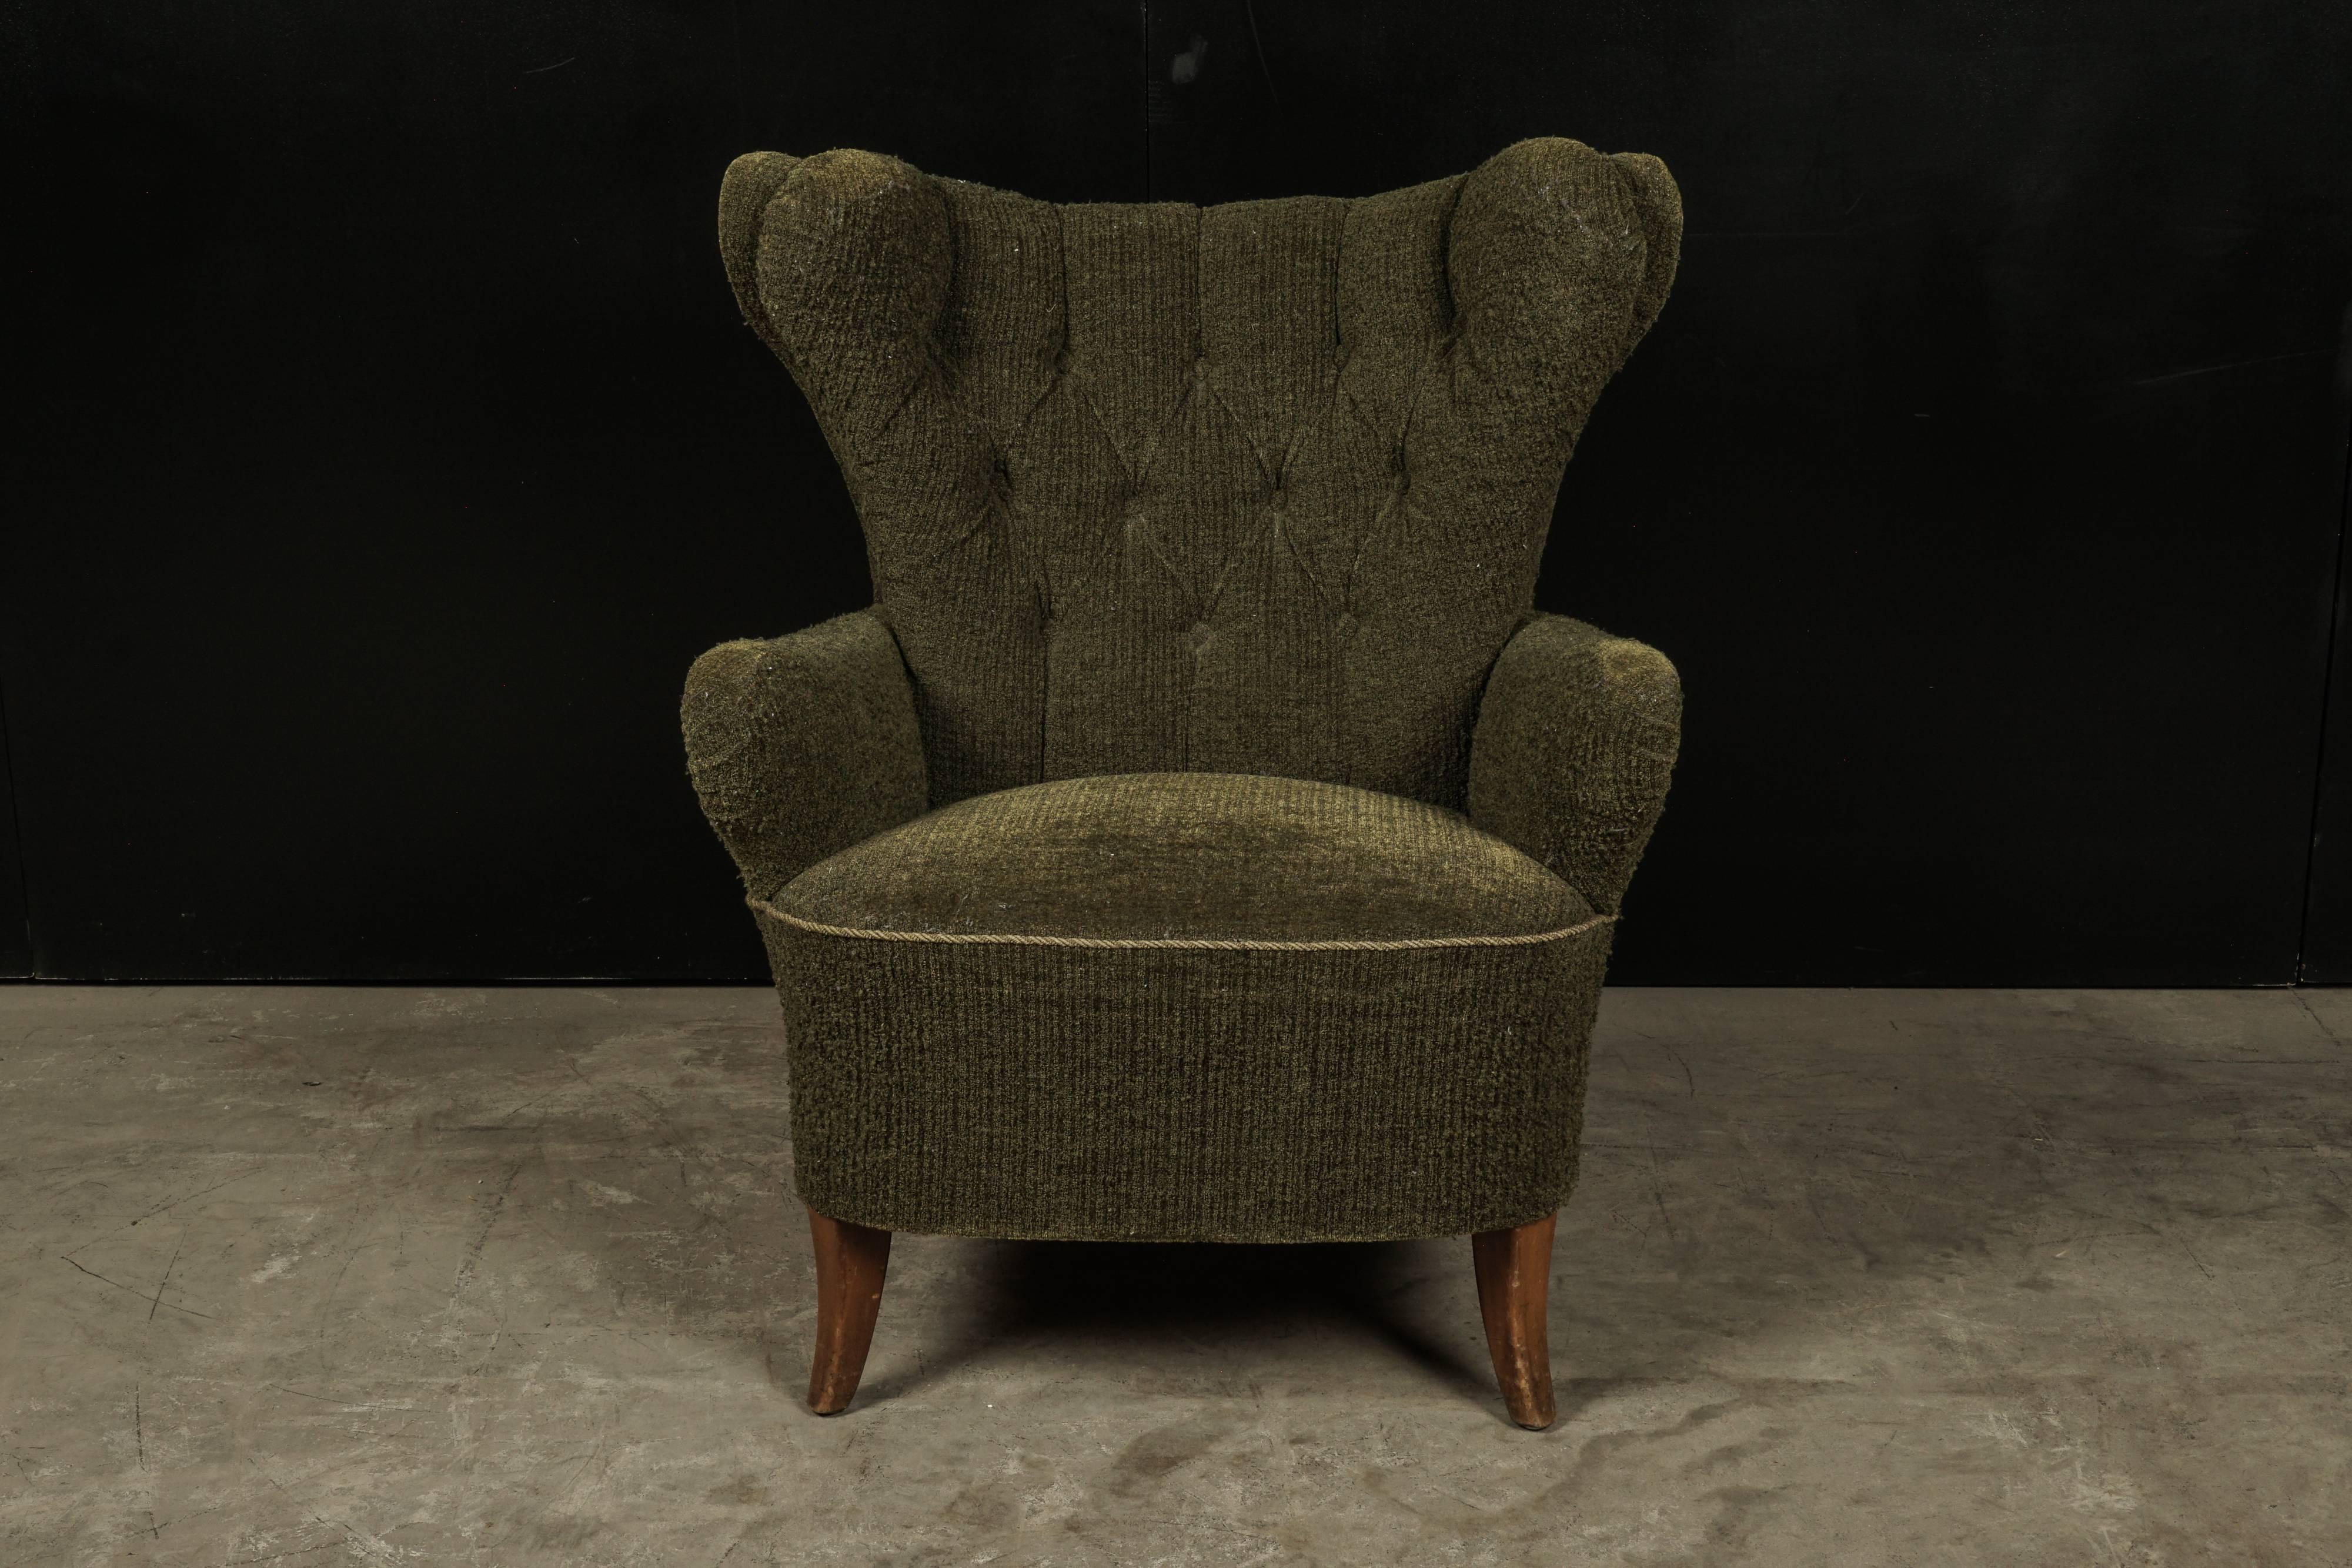 Midcentury wingback chair from Denmark, circa 1960. Original green upholstery with stained beech legs.